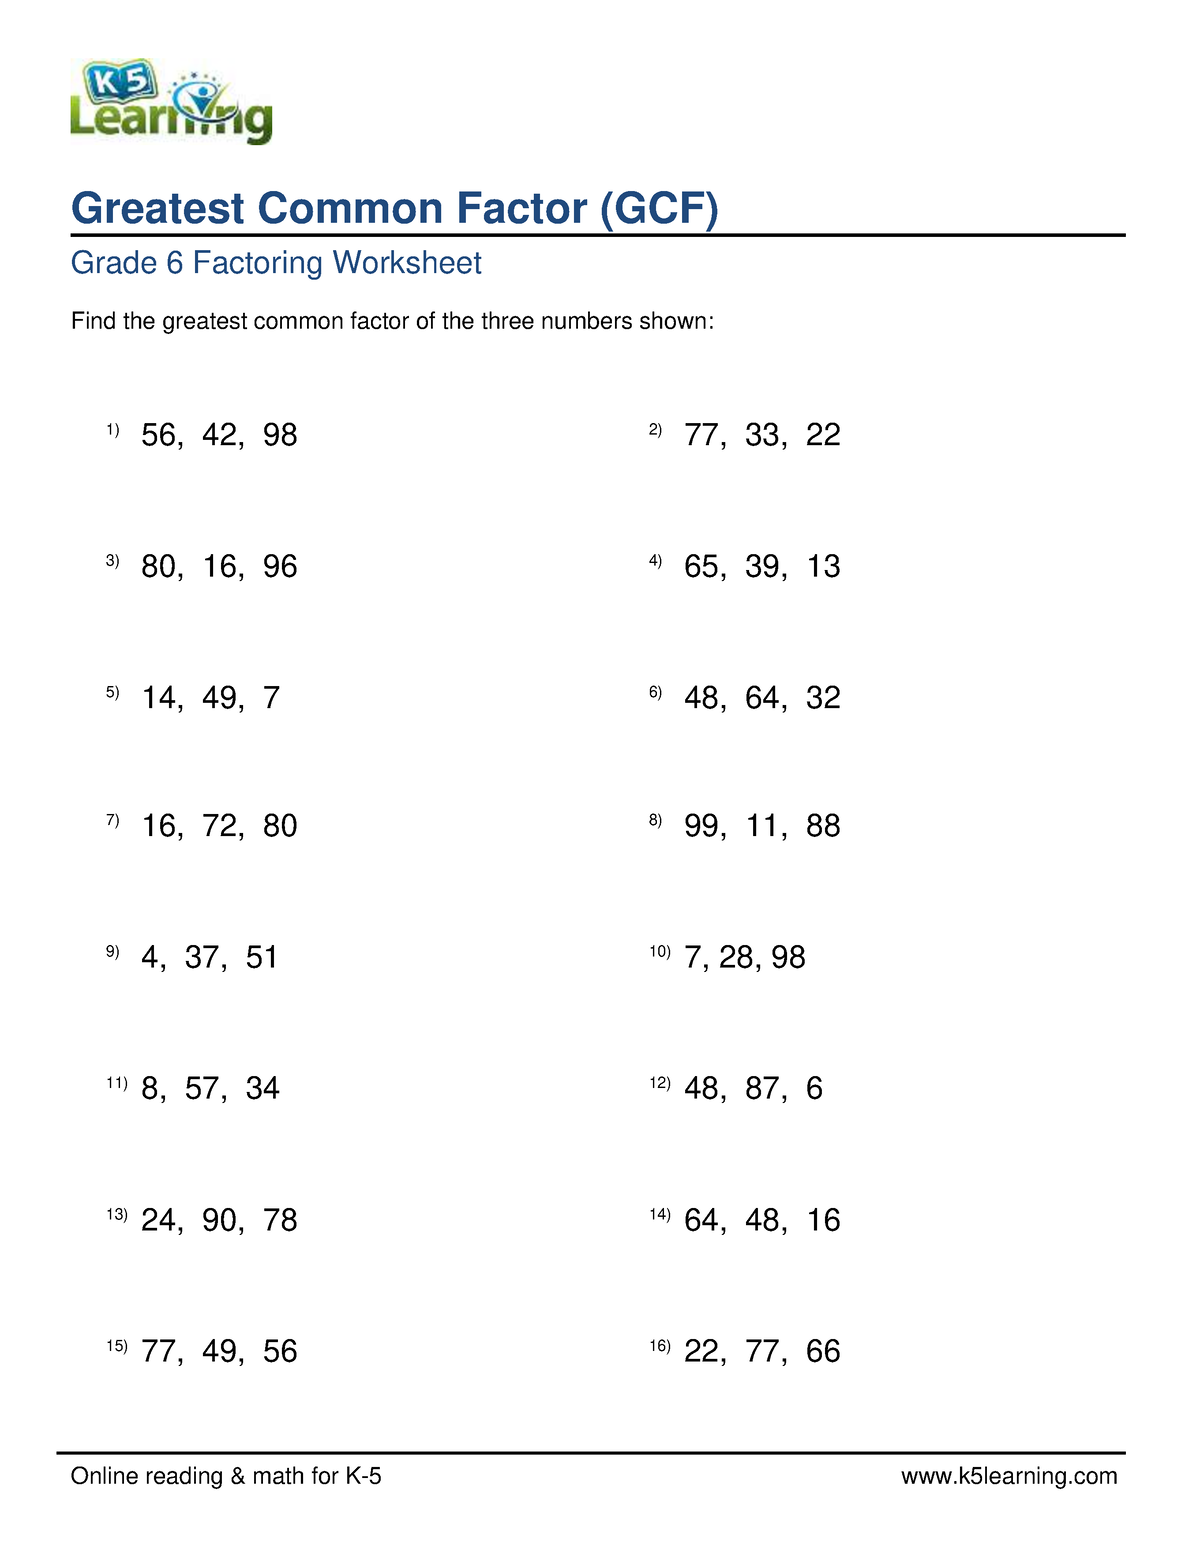 Grade 6 greatest common factor gcf 3 numbers 2 100 a - Online reading ...